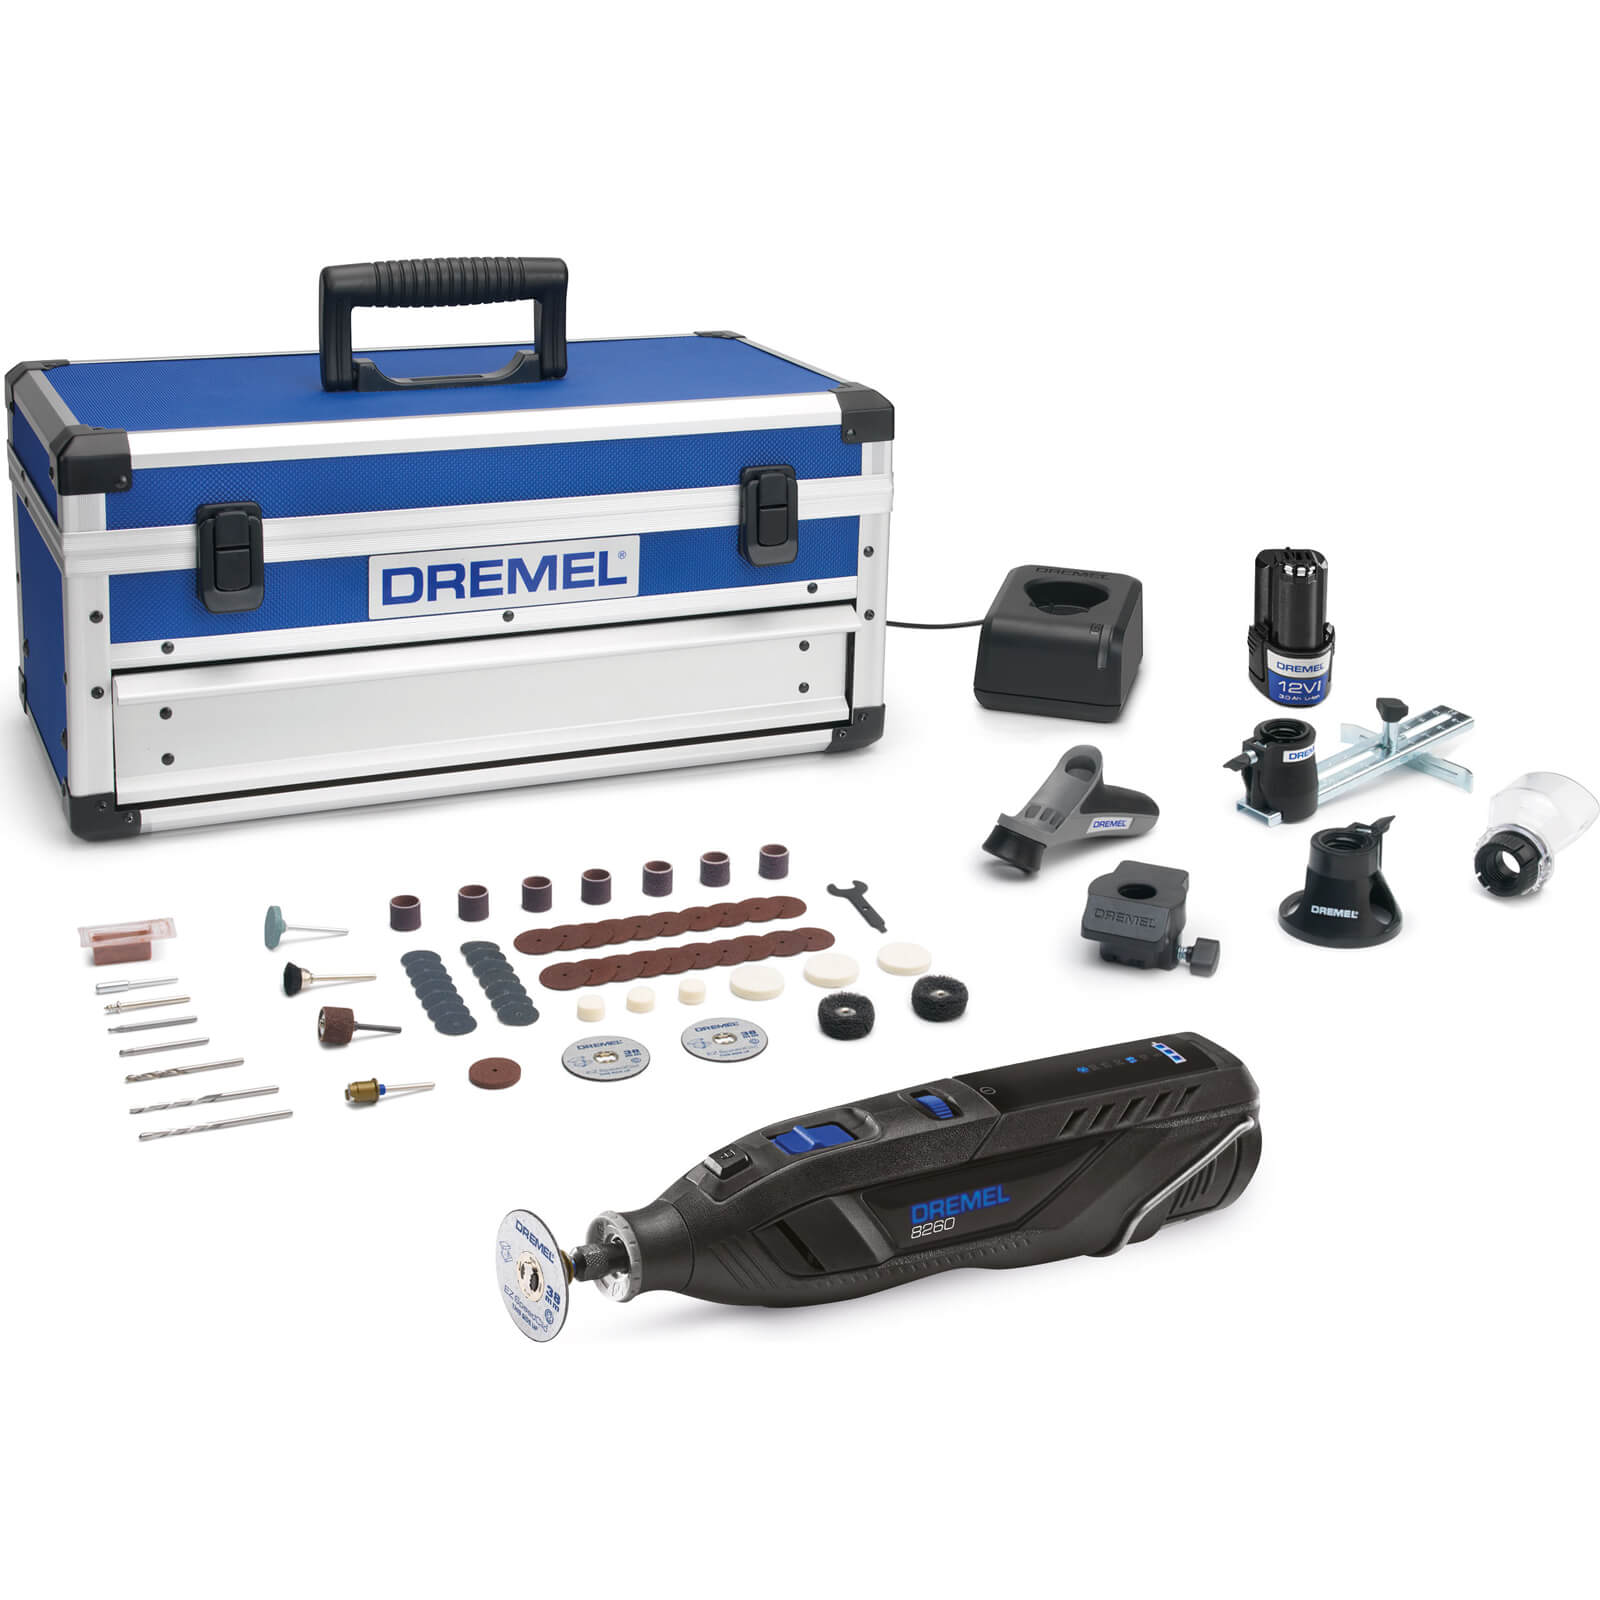 Dremel Accessories Kit 20 Piece Cleaning Polishing